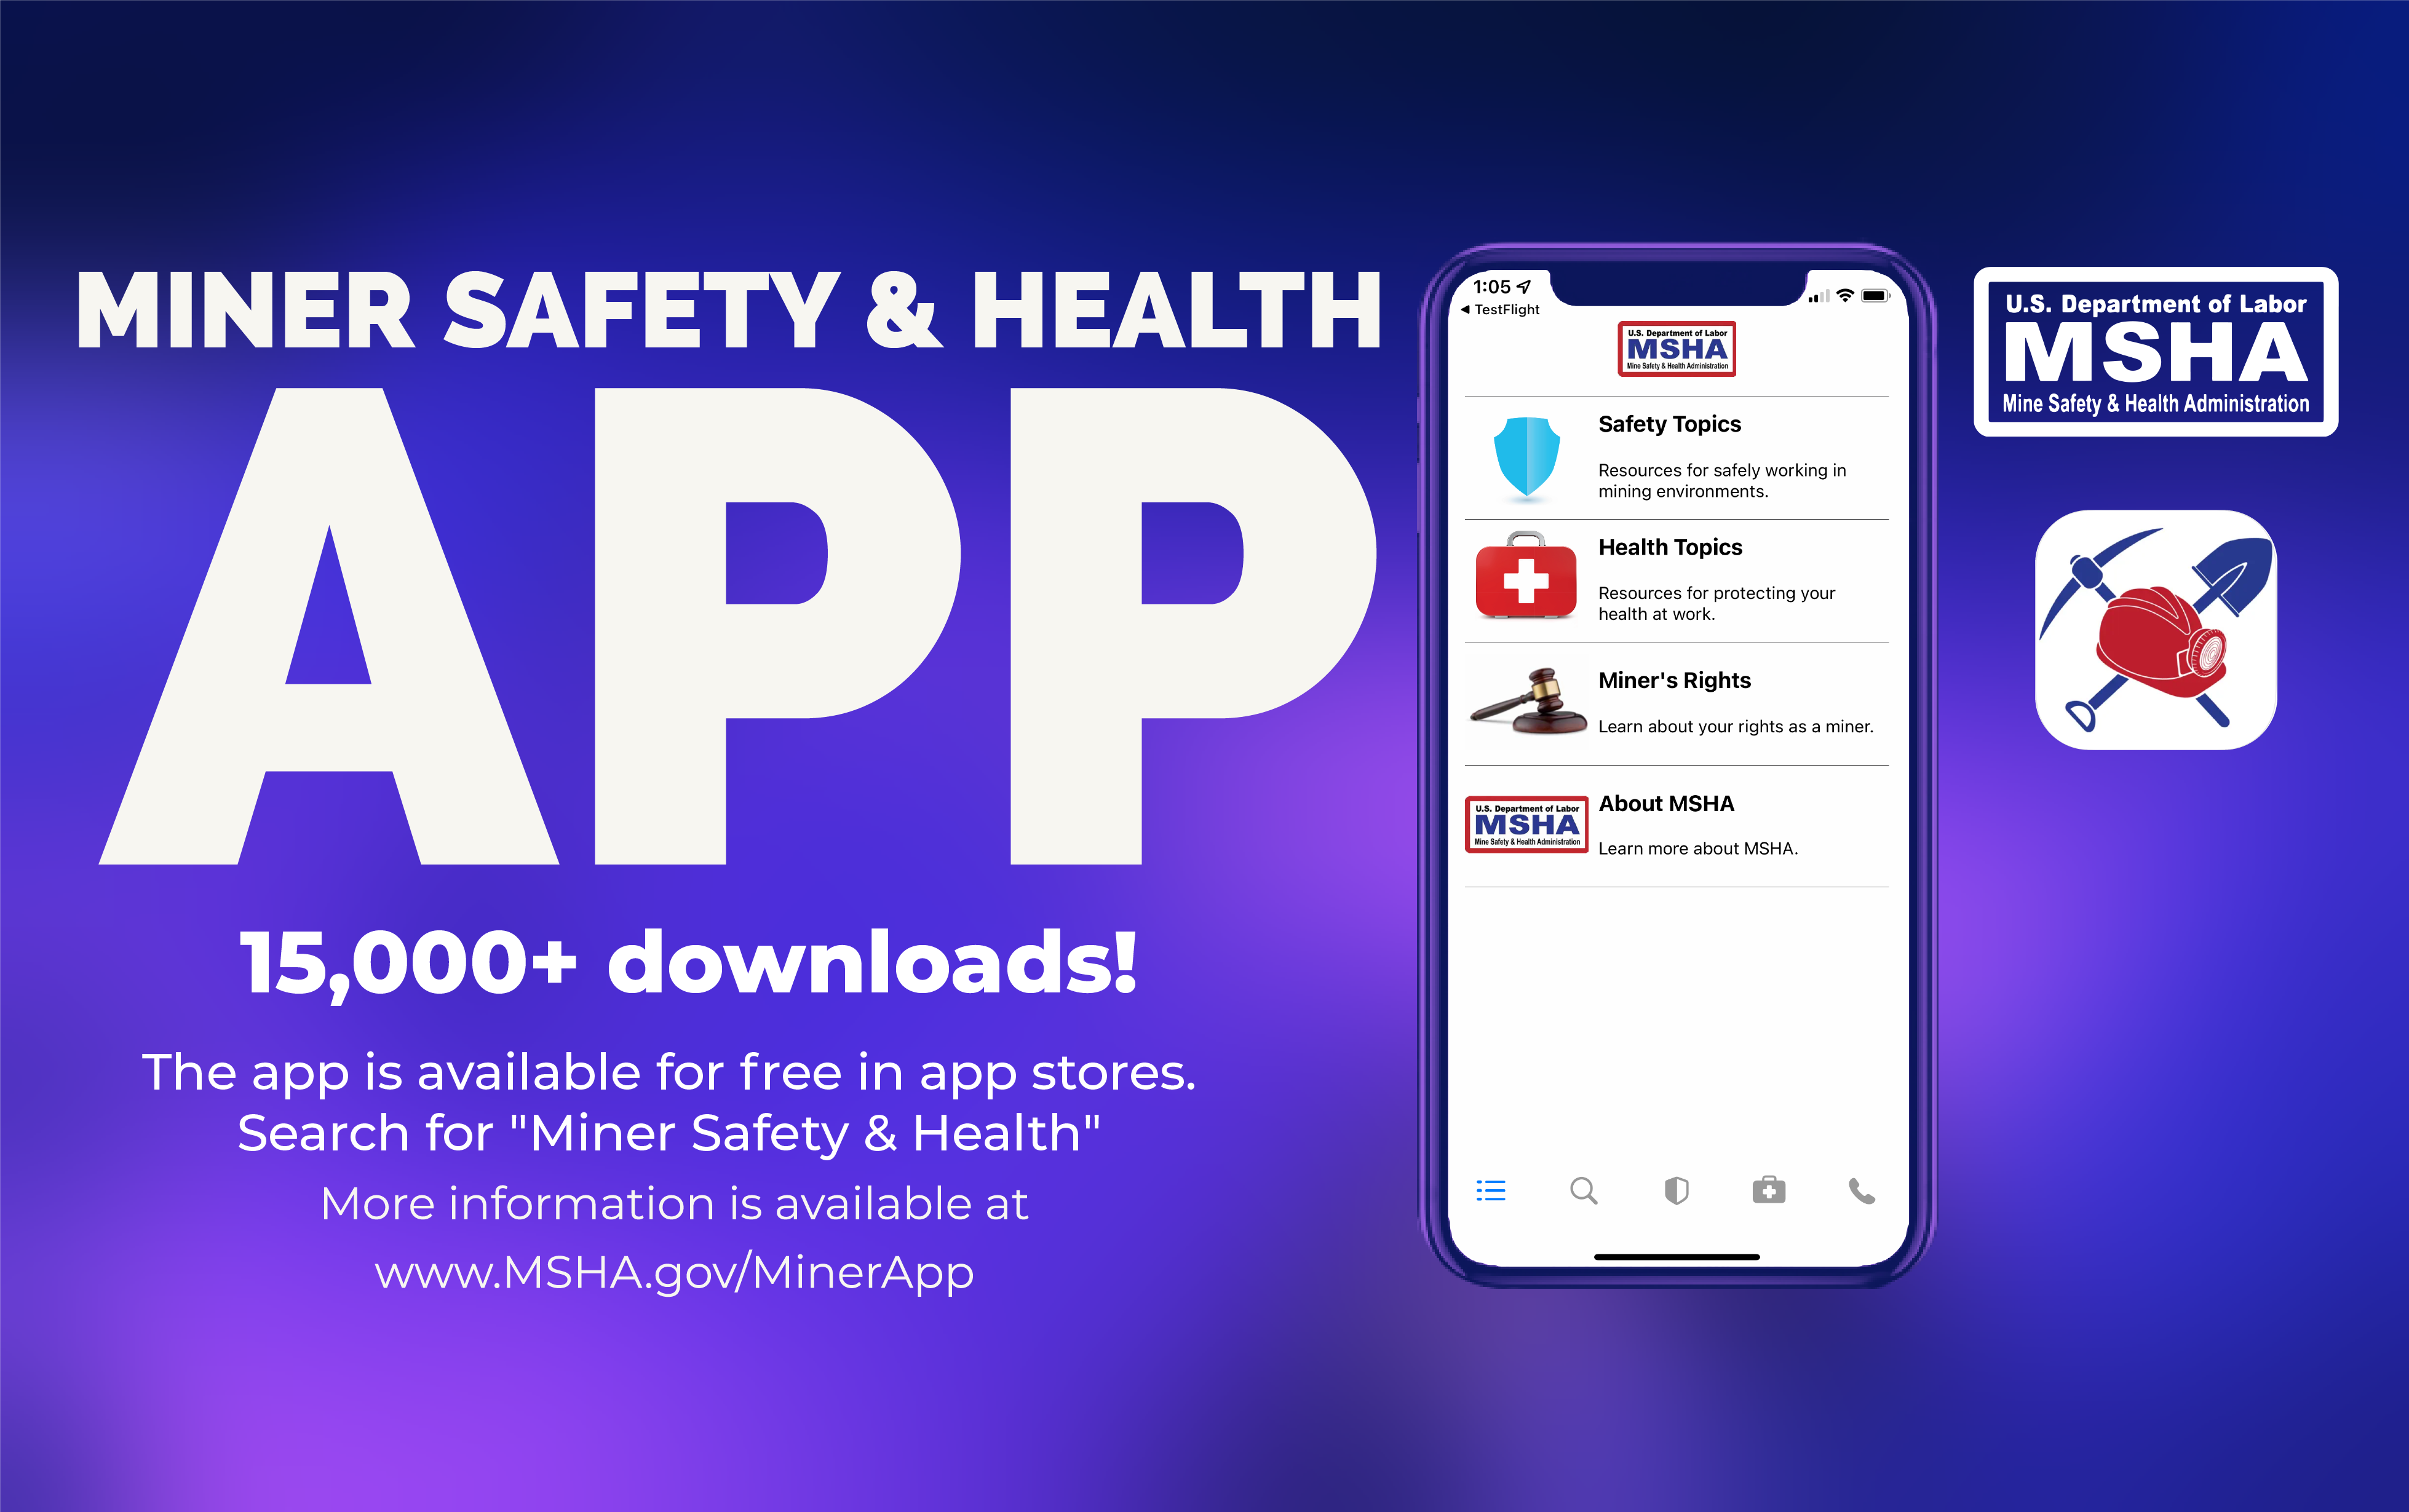 Miners have a new tool to stay safe and healthy